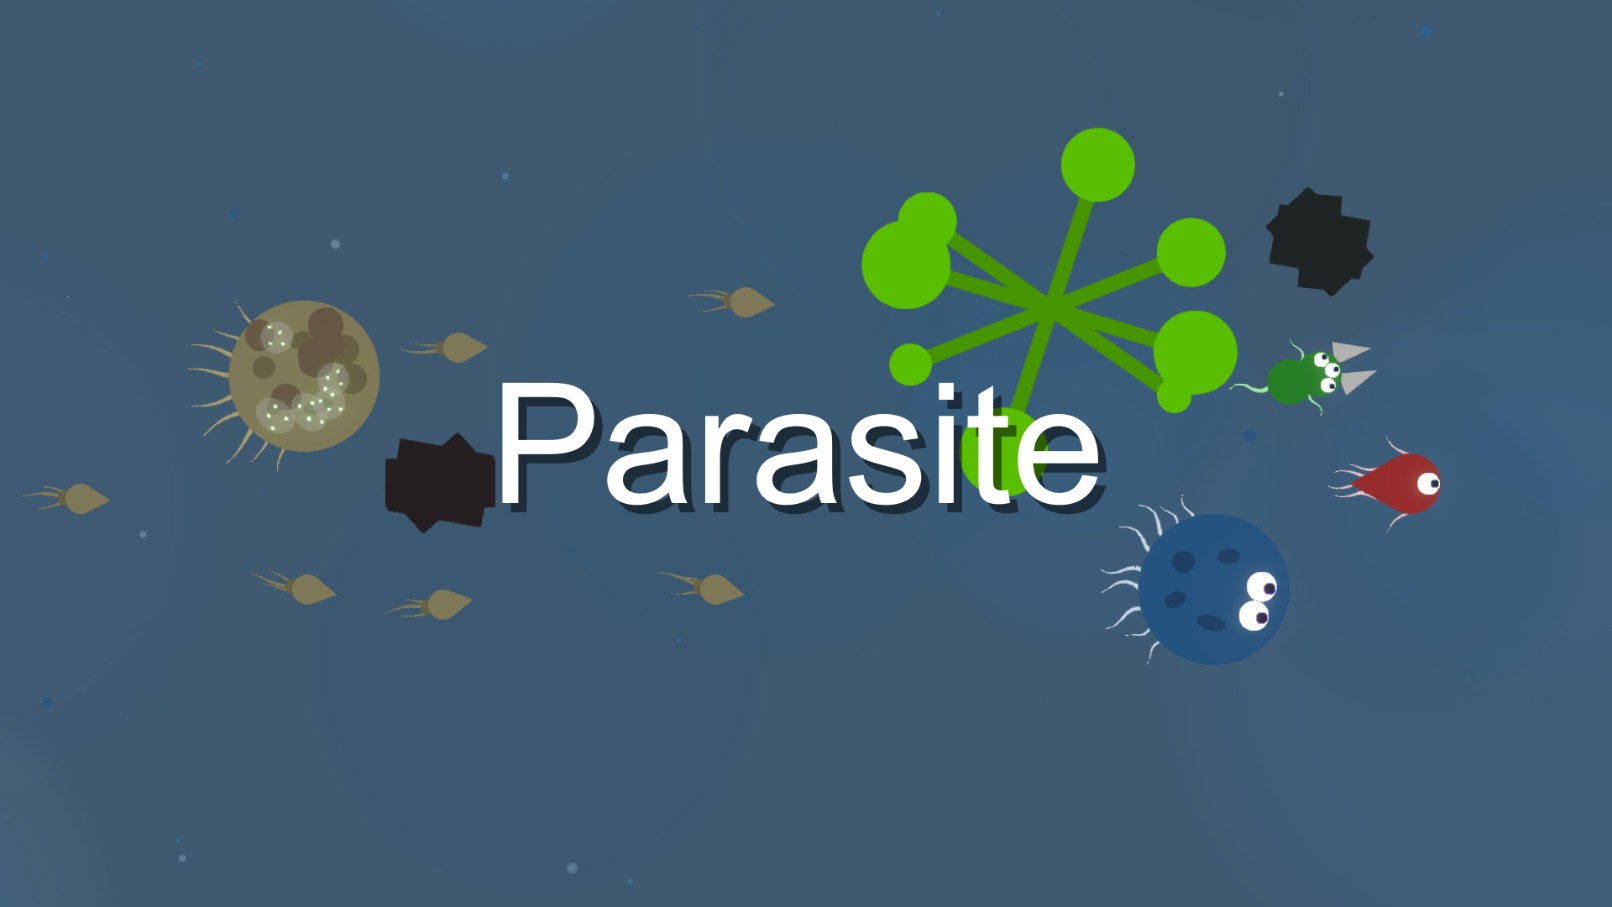 nsfw games with parasites